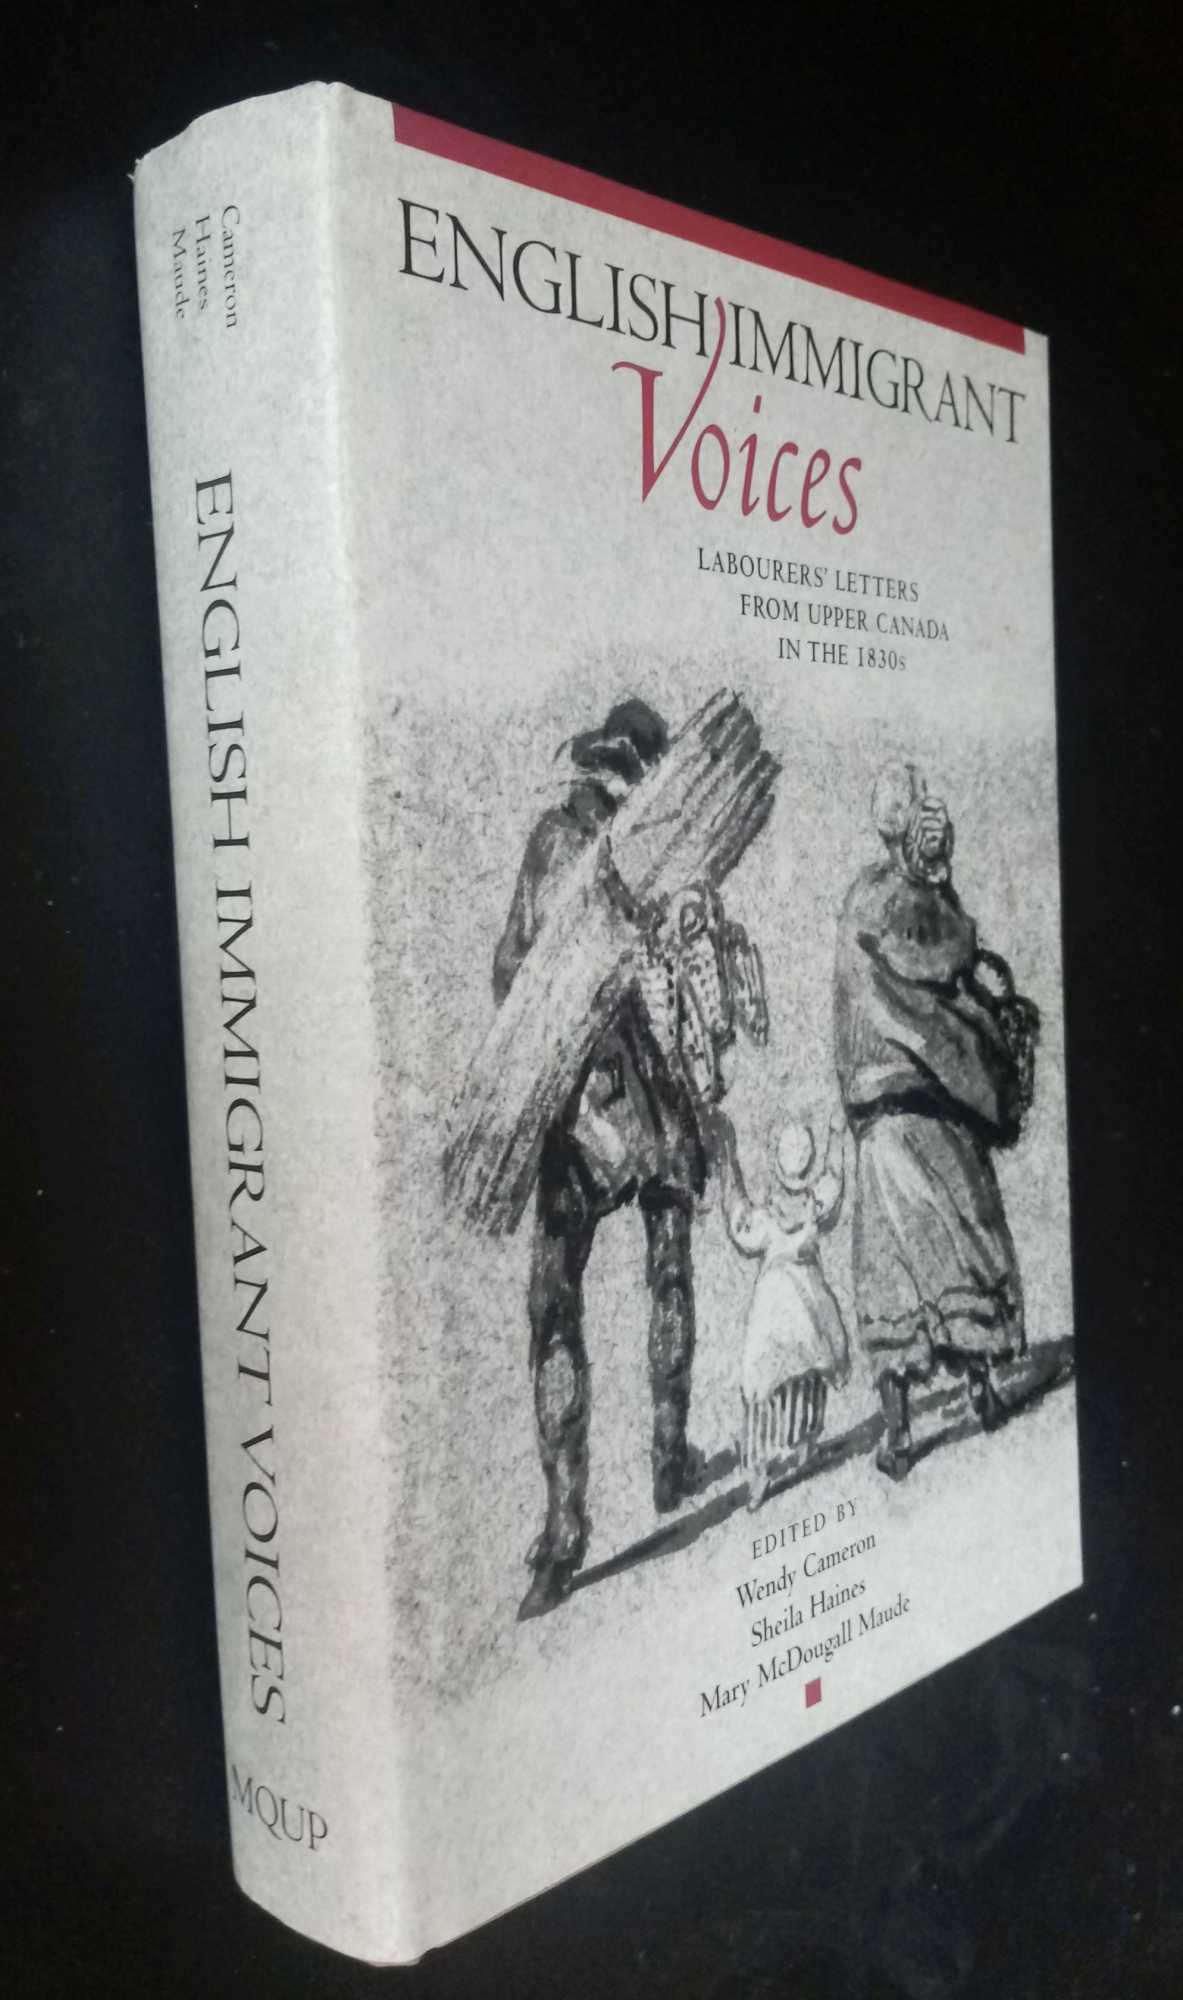 Wendy Cameron, ed. - English Immigrant Voices: Labourers' Letters from Upper Canada in the 1830s